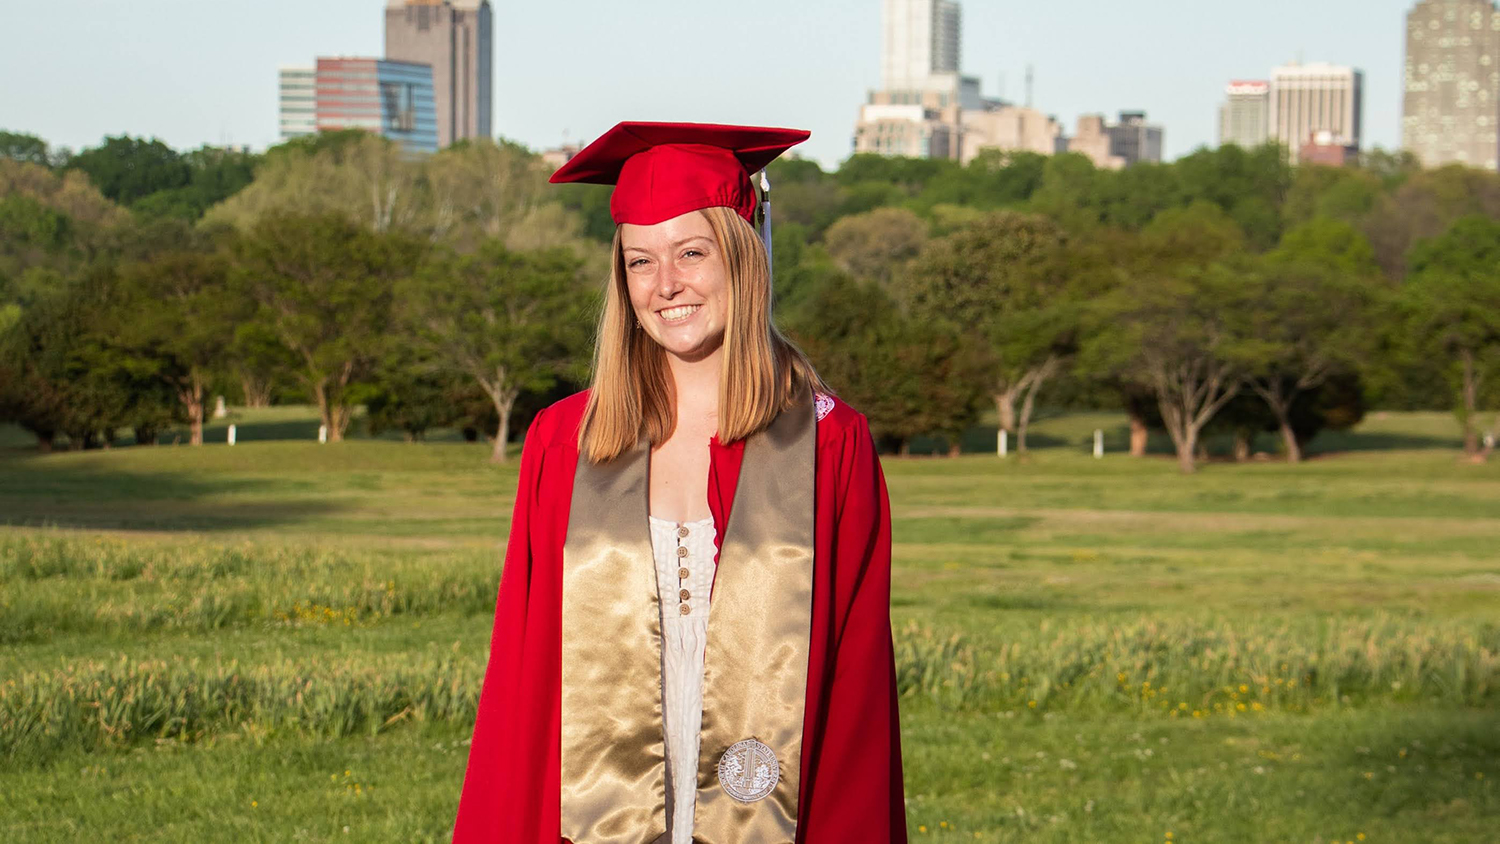 Massey Stichter - Graduation to Vocation: Massey Stichter is Promoting Outdoor Recreation - College of Natural Resources News NC State University